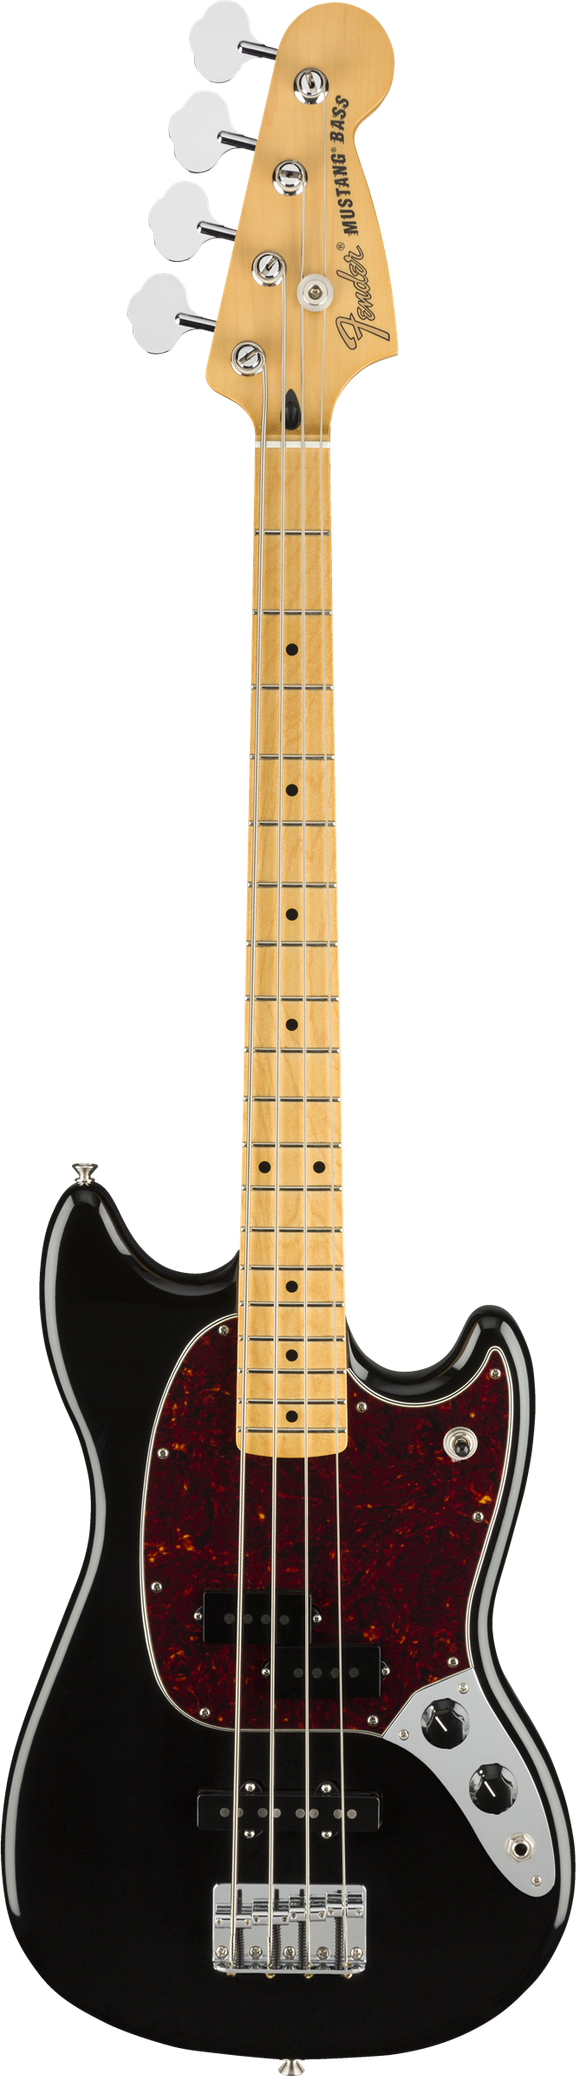 Fender Limited Edition Player Mustang Bass PJ, Maple Fingerboard, Black